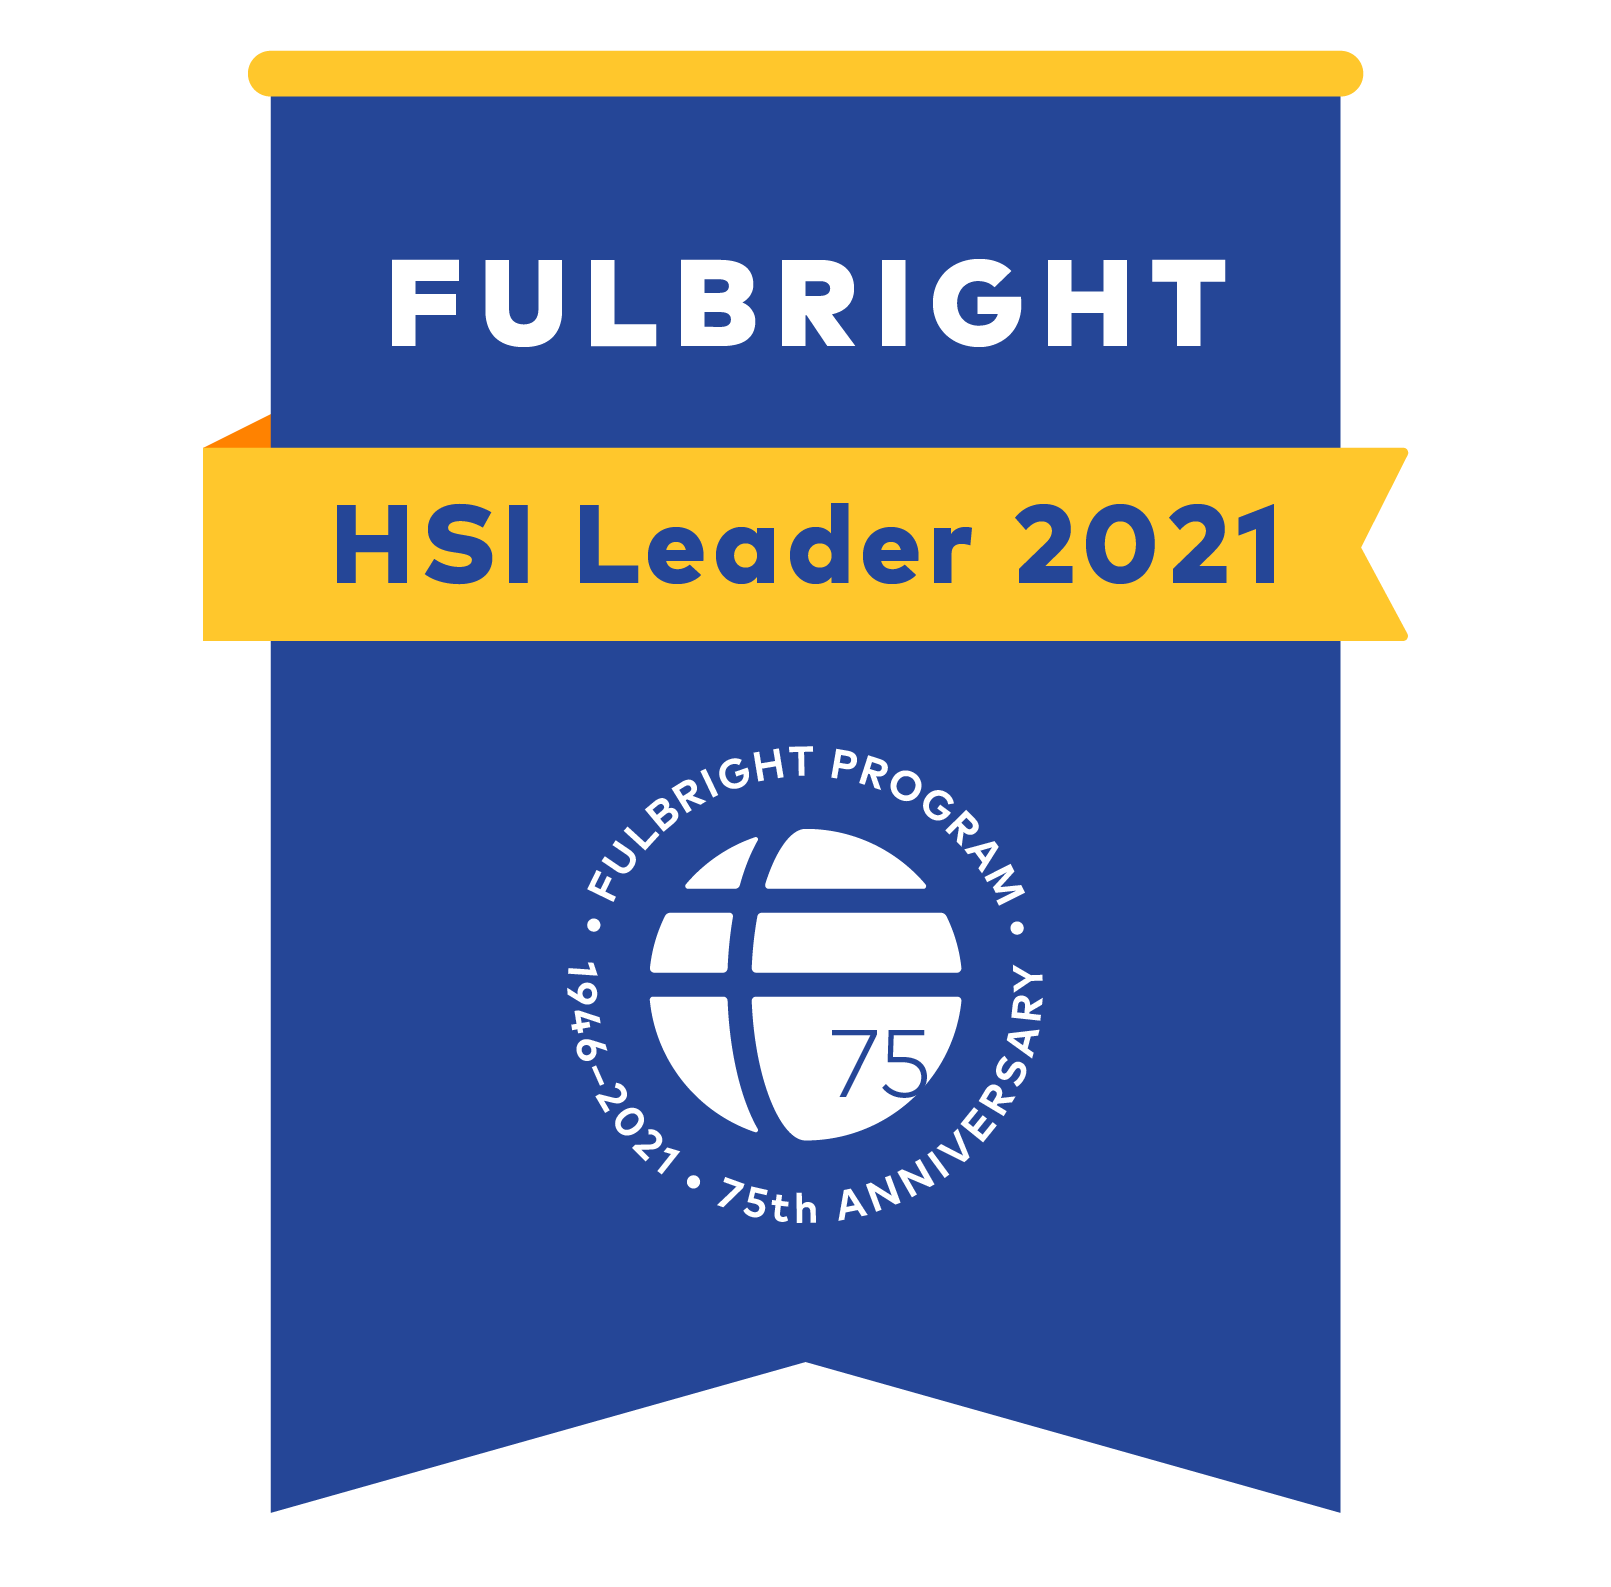 Fulbright HIS badge